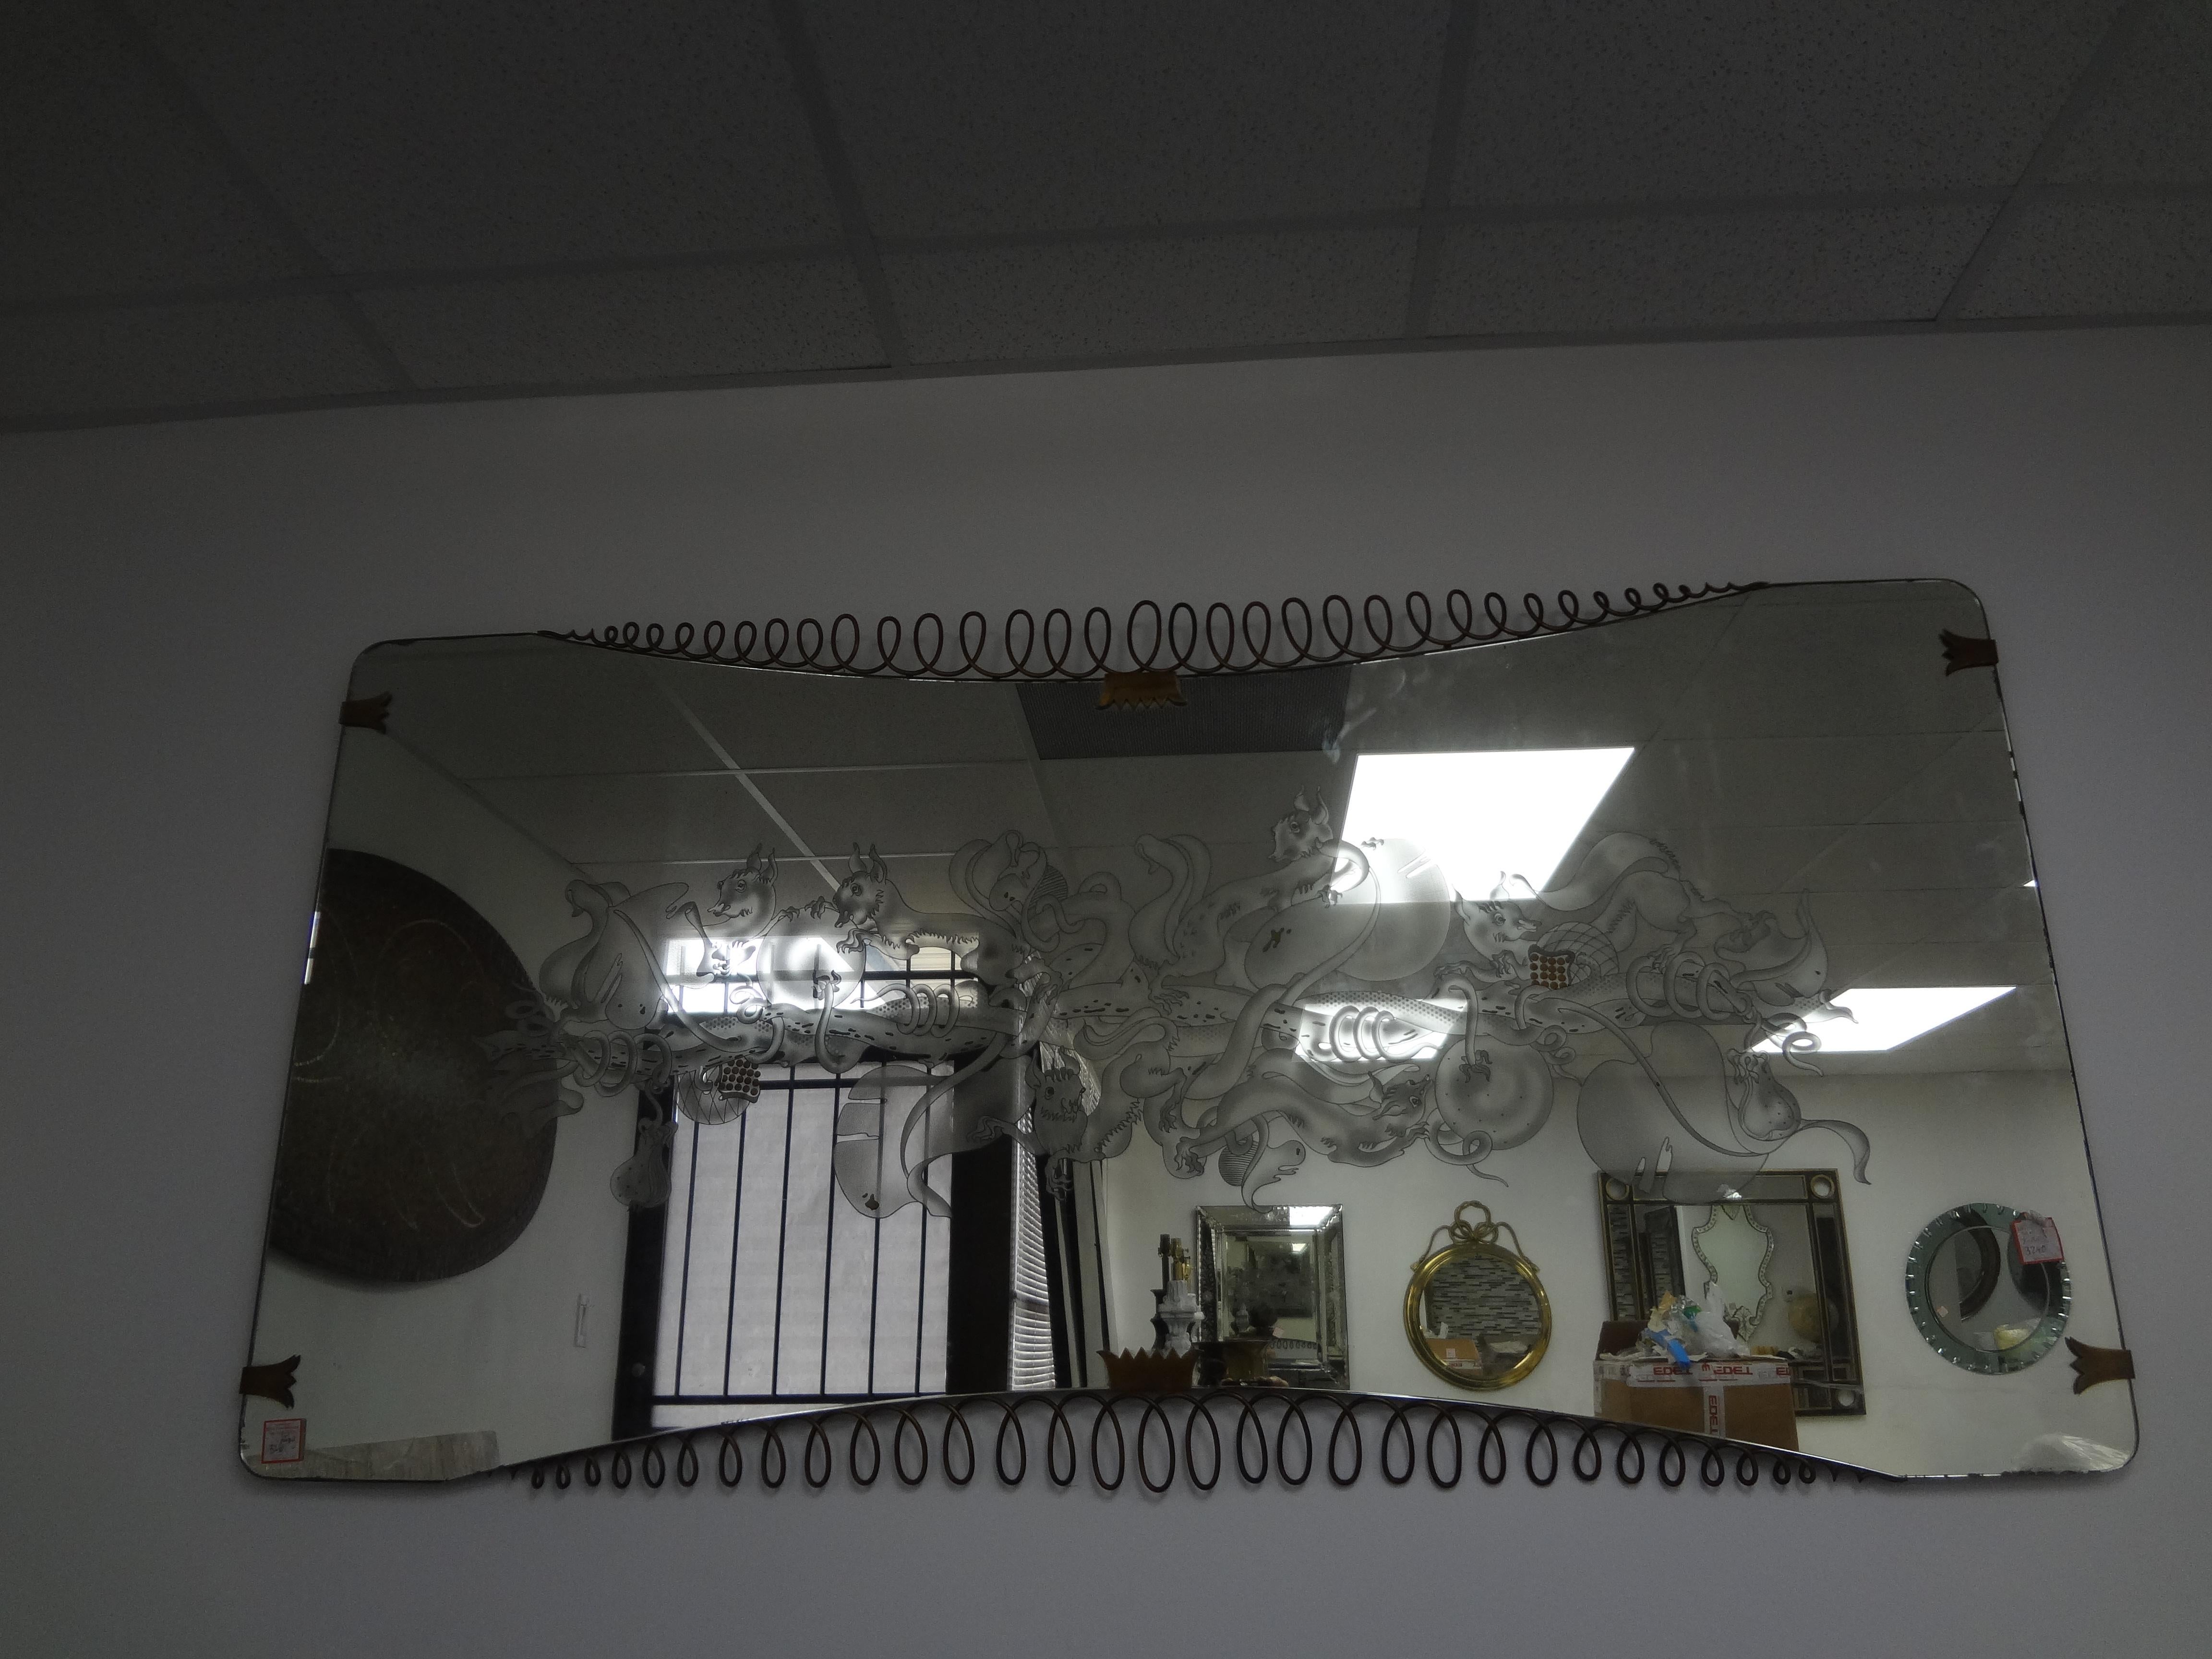 Italian Etched Mirror With Brass Accents Att. To Max Ingrand For Fontana Arte.
This magnificent large Italian mid century modern horizontal mirror has a beautiful etched dragon design trimmed with brass accents.
A most unusual statement mirror!
